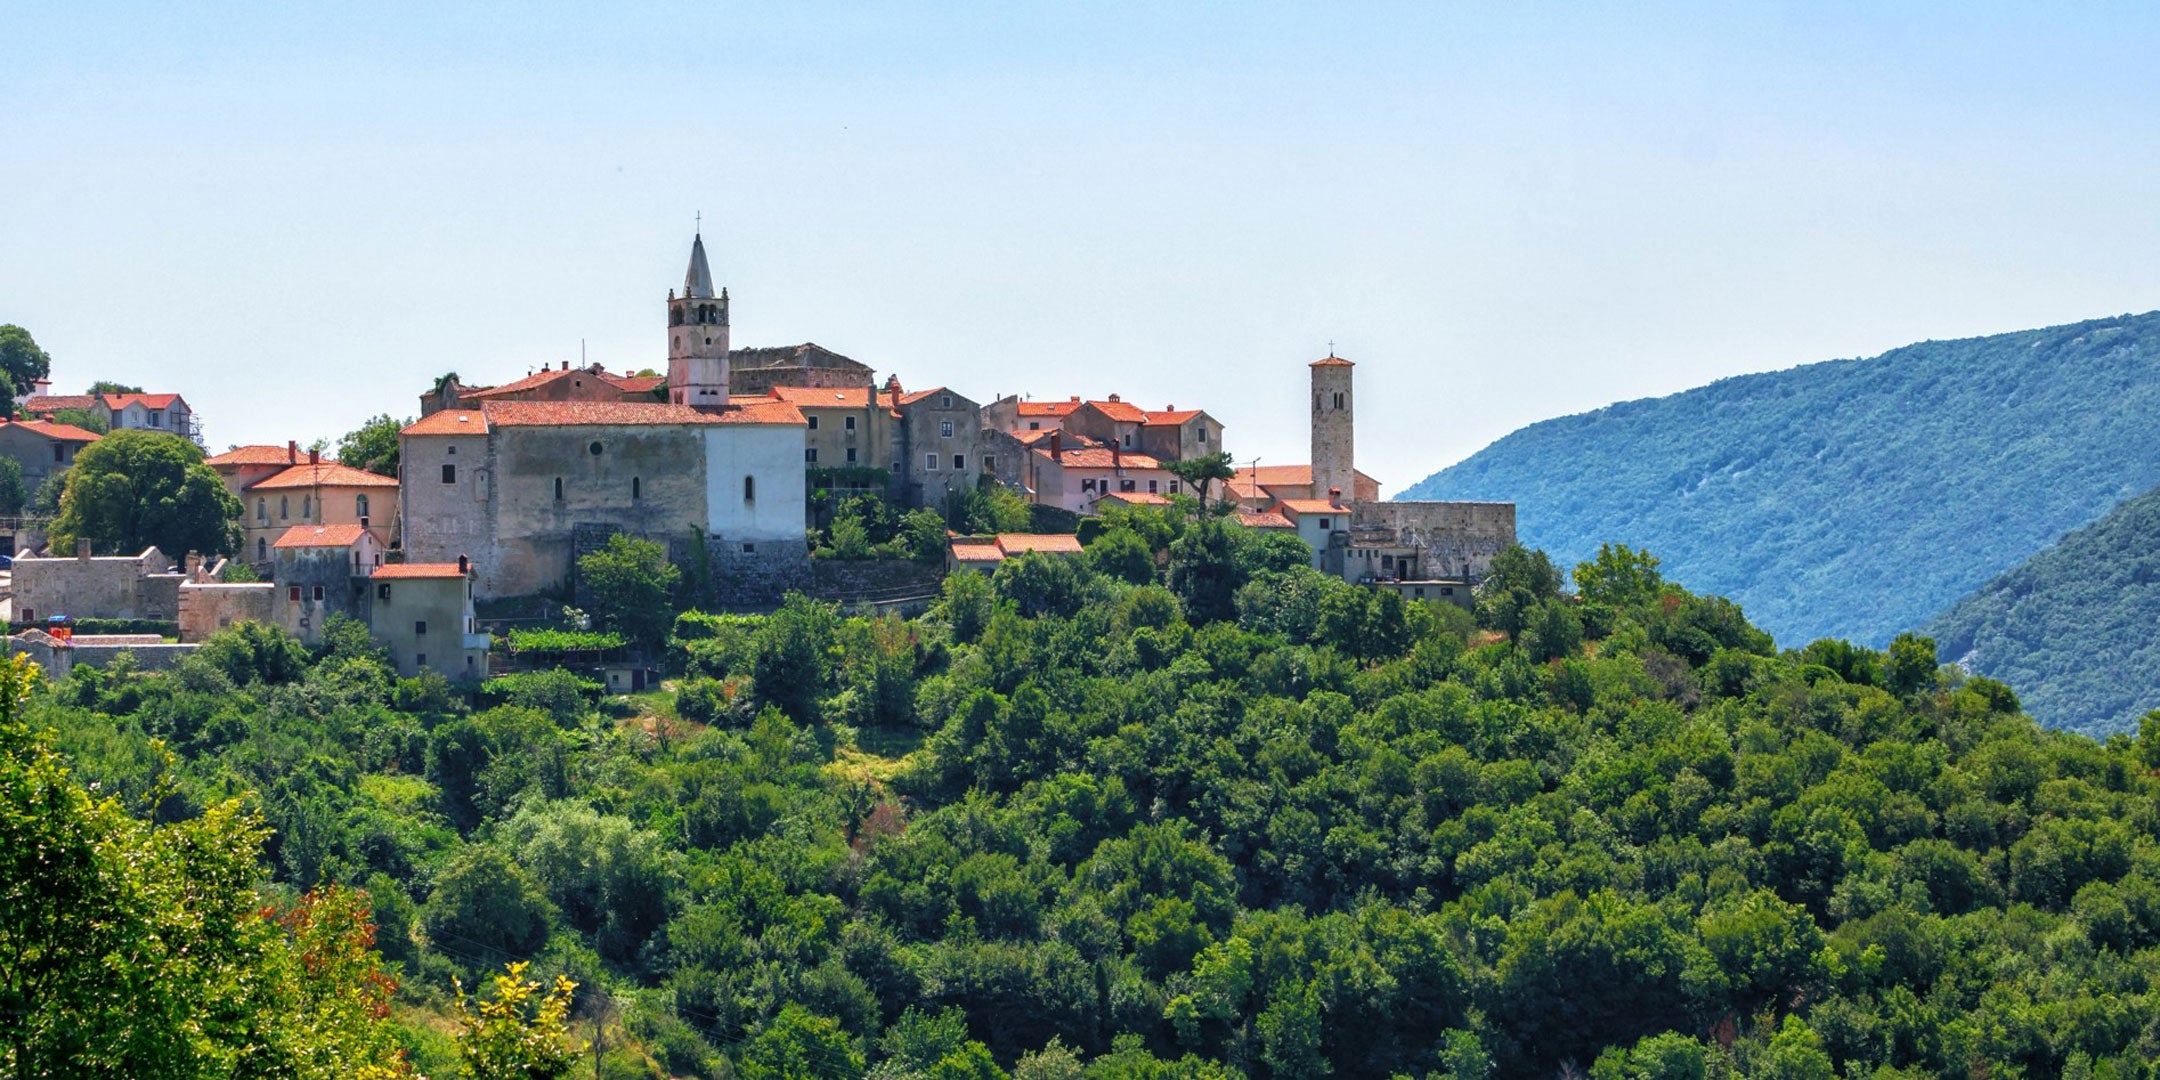 Labin is an old town in Istria